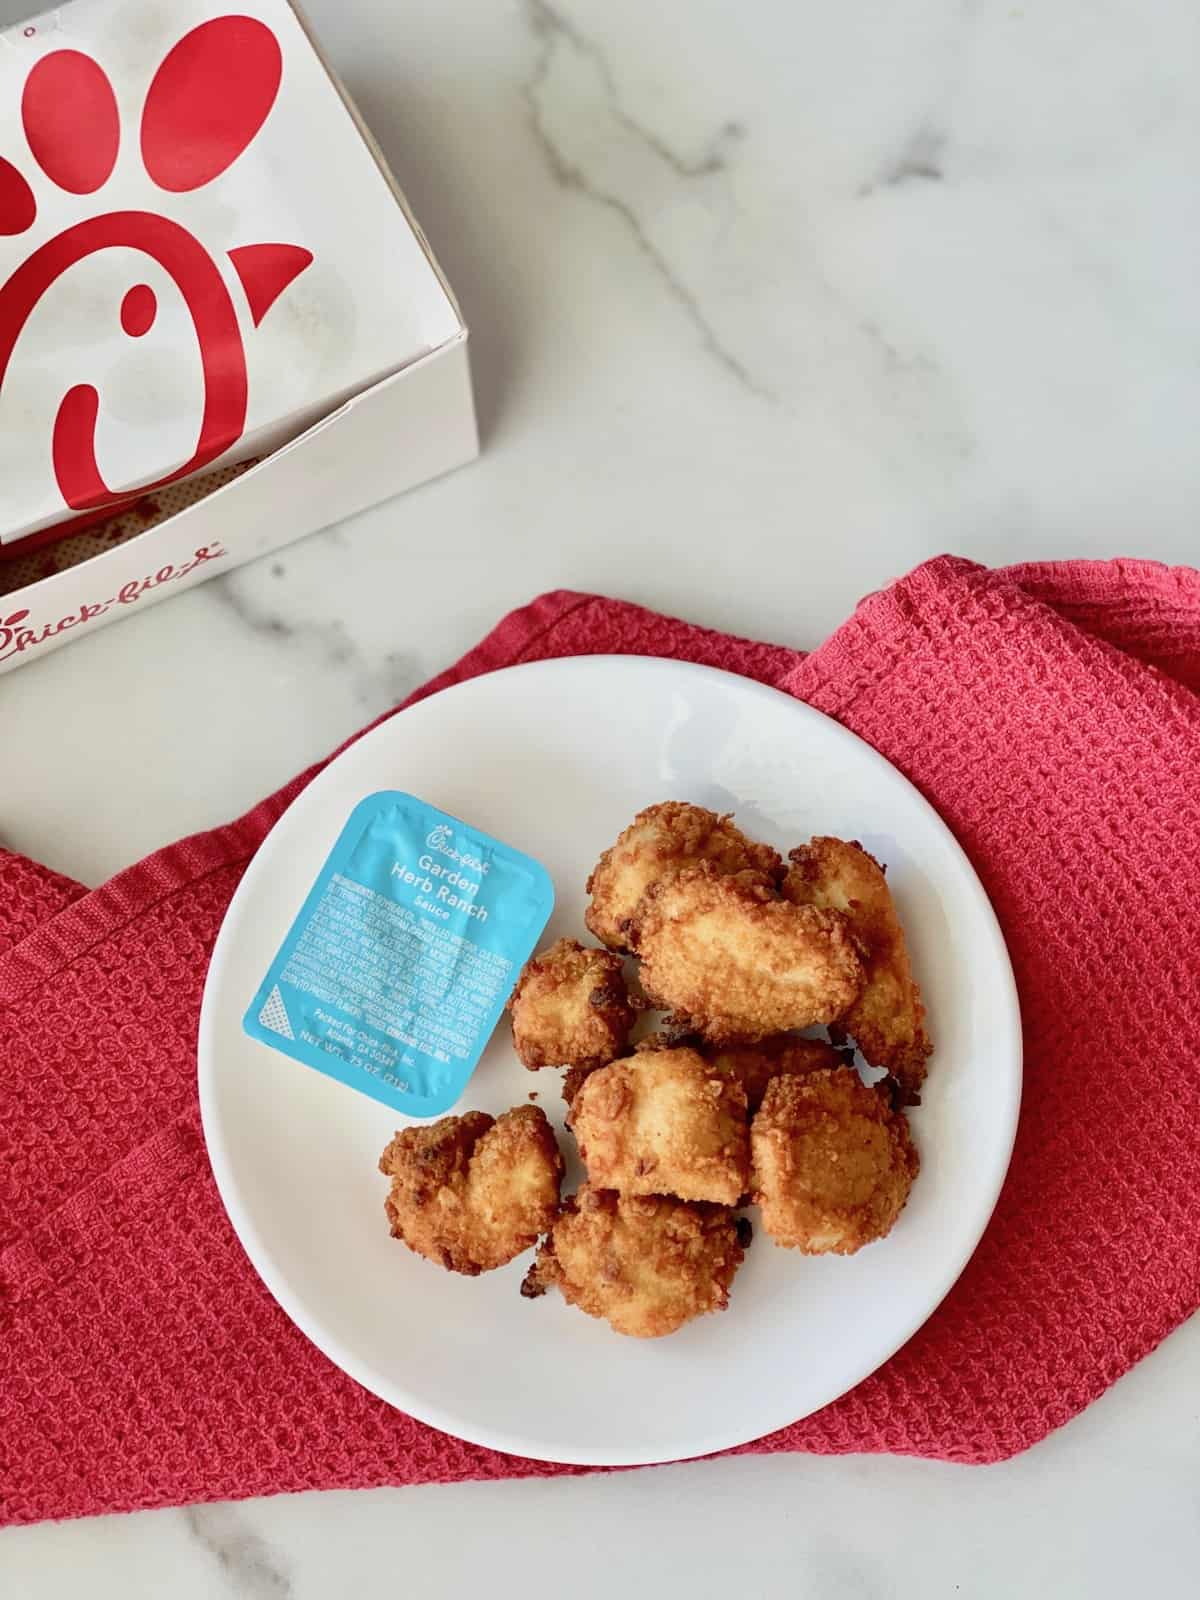 How to Reheat Chick-fil-a Nuggets in the Air Fryer with takeout box and plated ready to eat